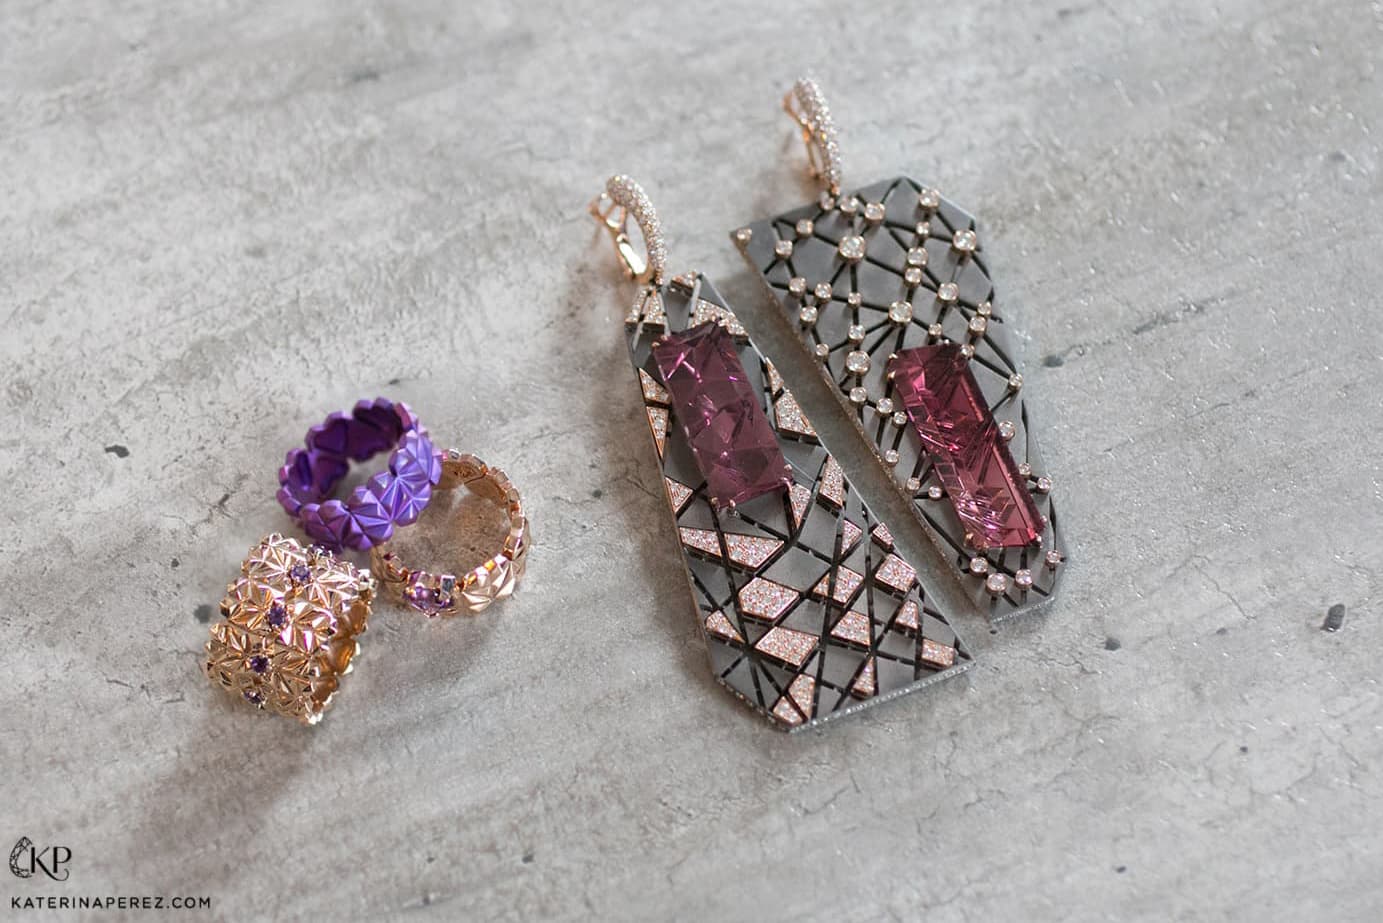 VMAR 'Q-Ore' rings with amethyst in rose gold in titanium and 'Orion & Auriga' earrings with fancy cut pink tourmalines of 17.50ct and 17.60ct, and diamonds in pink gold and titanium